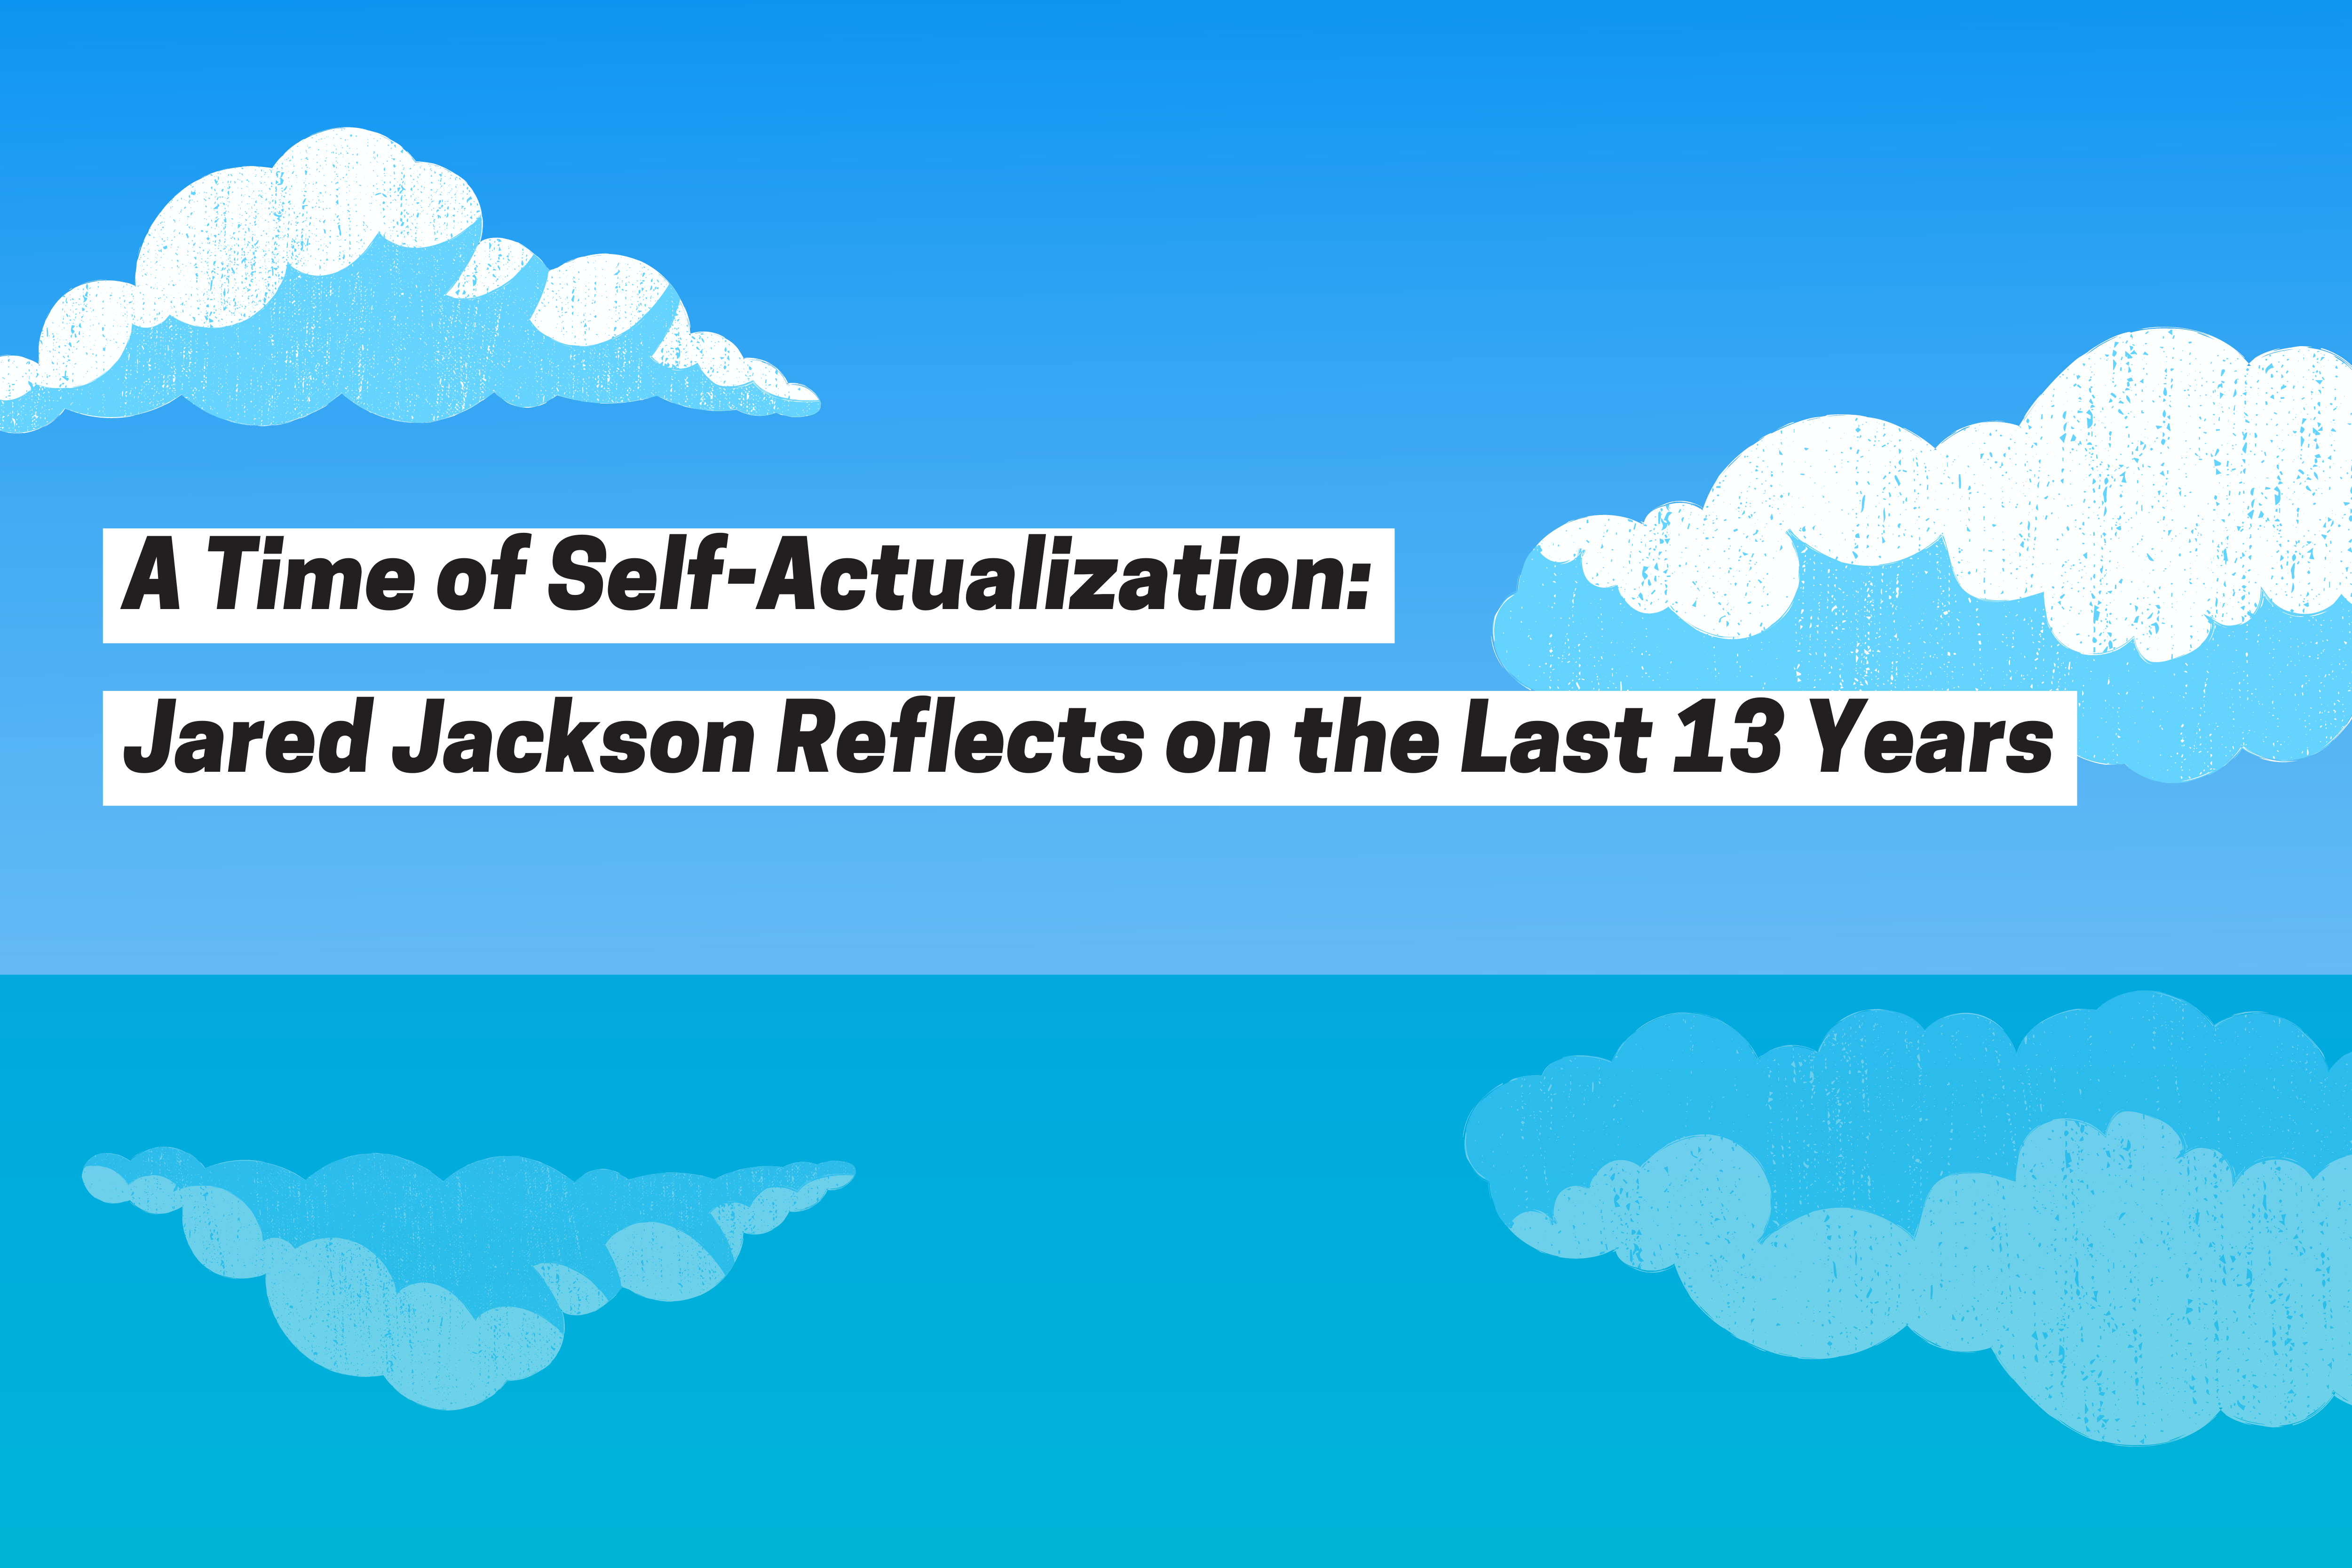 A Time of Self-Actualization: Jared Jackson Reflects on the Last 13 Years, background graphic image of clouds in the sky reflecting on water